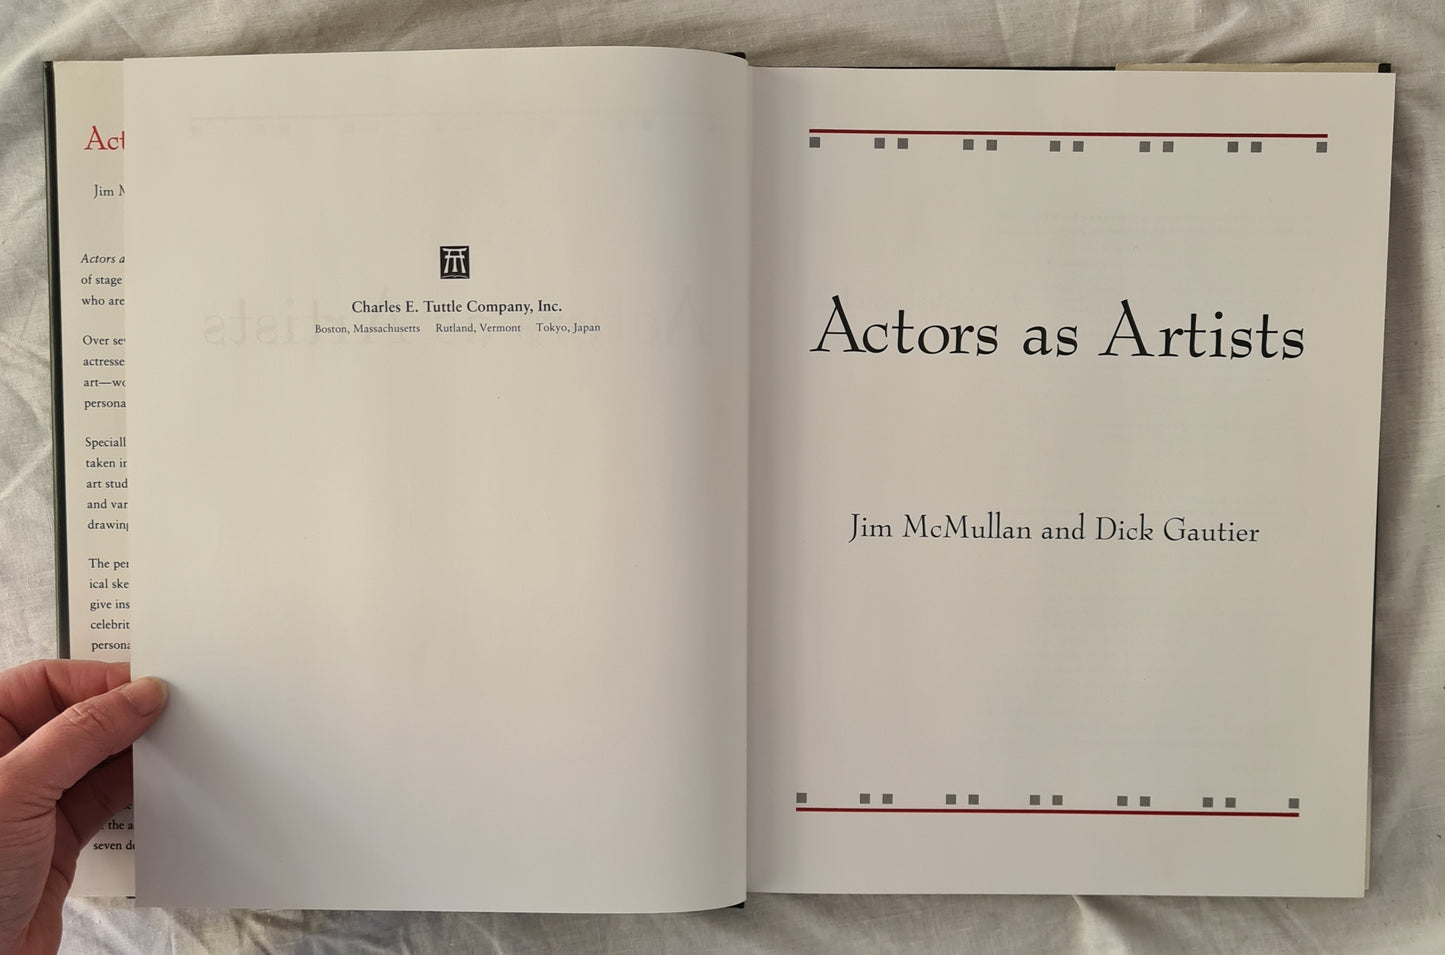 Actors as Artists by Jim McMullan and Dick Gautier